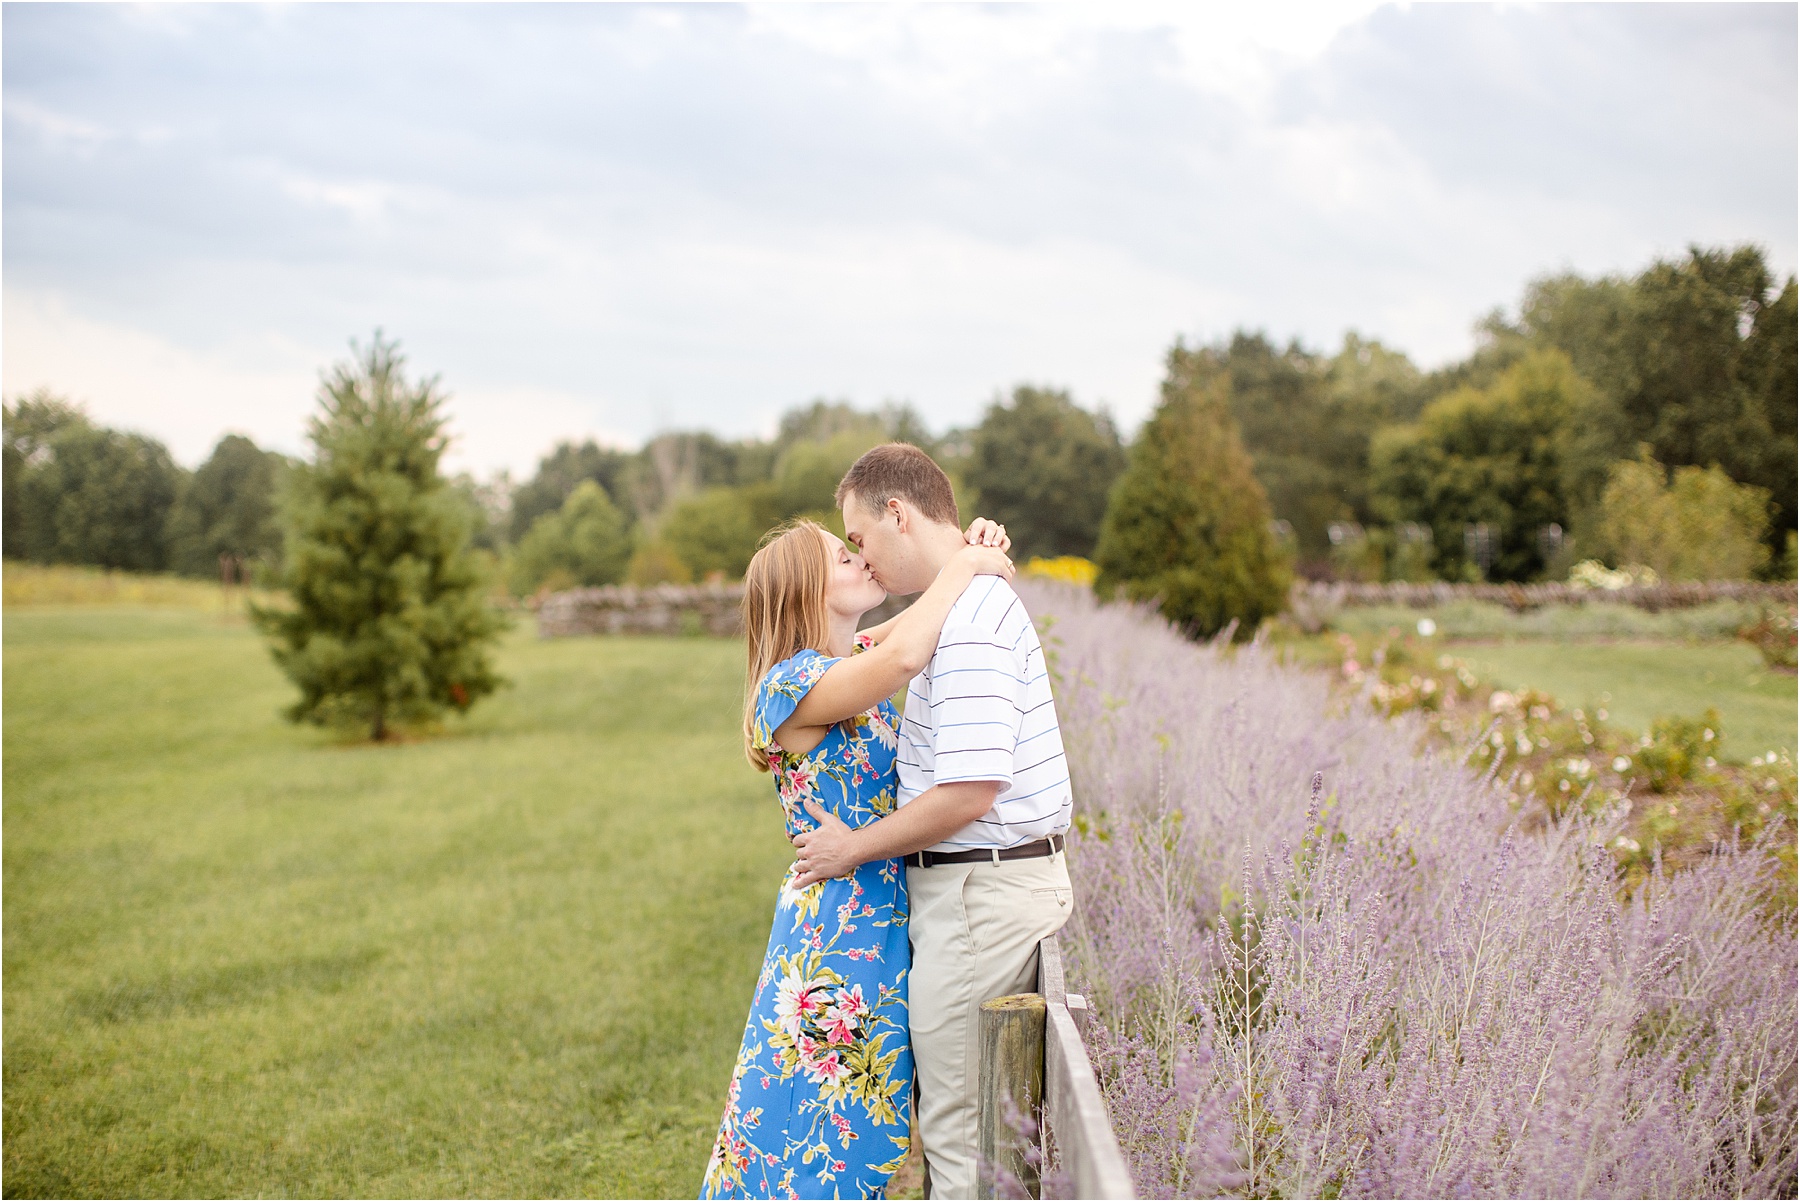 Man leans up against fence of lavender field for engagement pictures